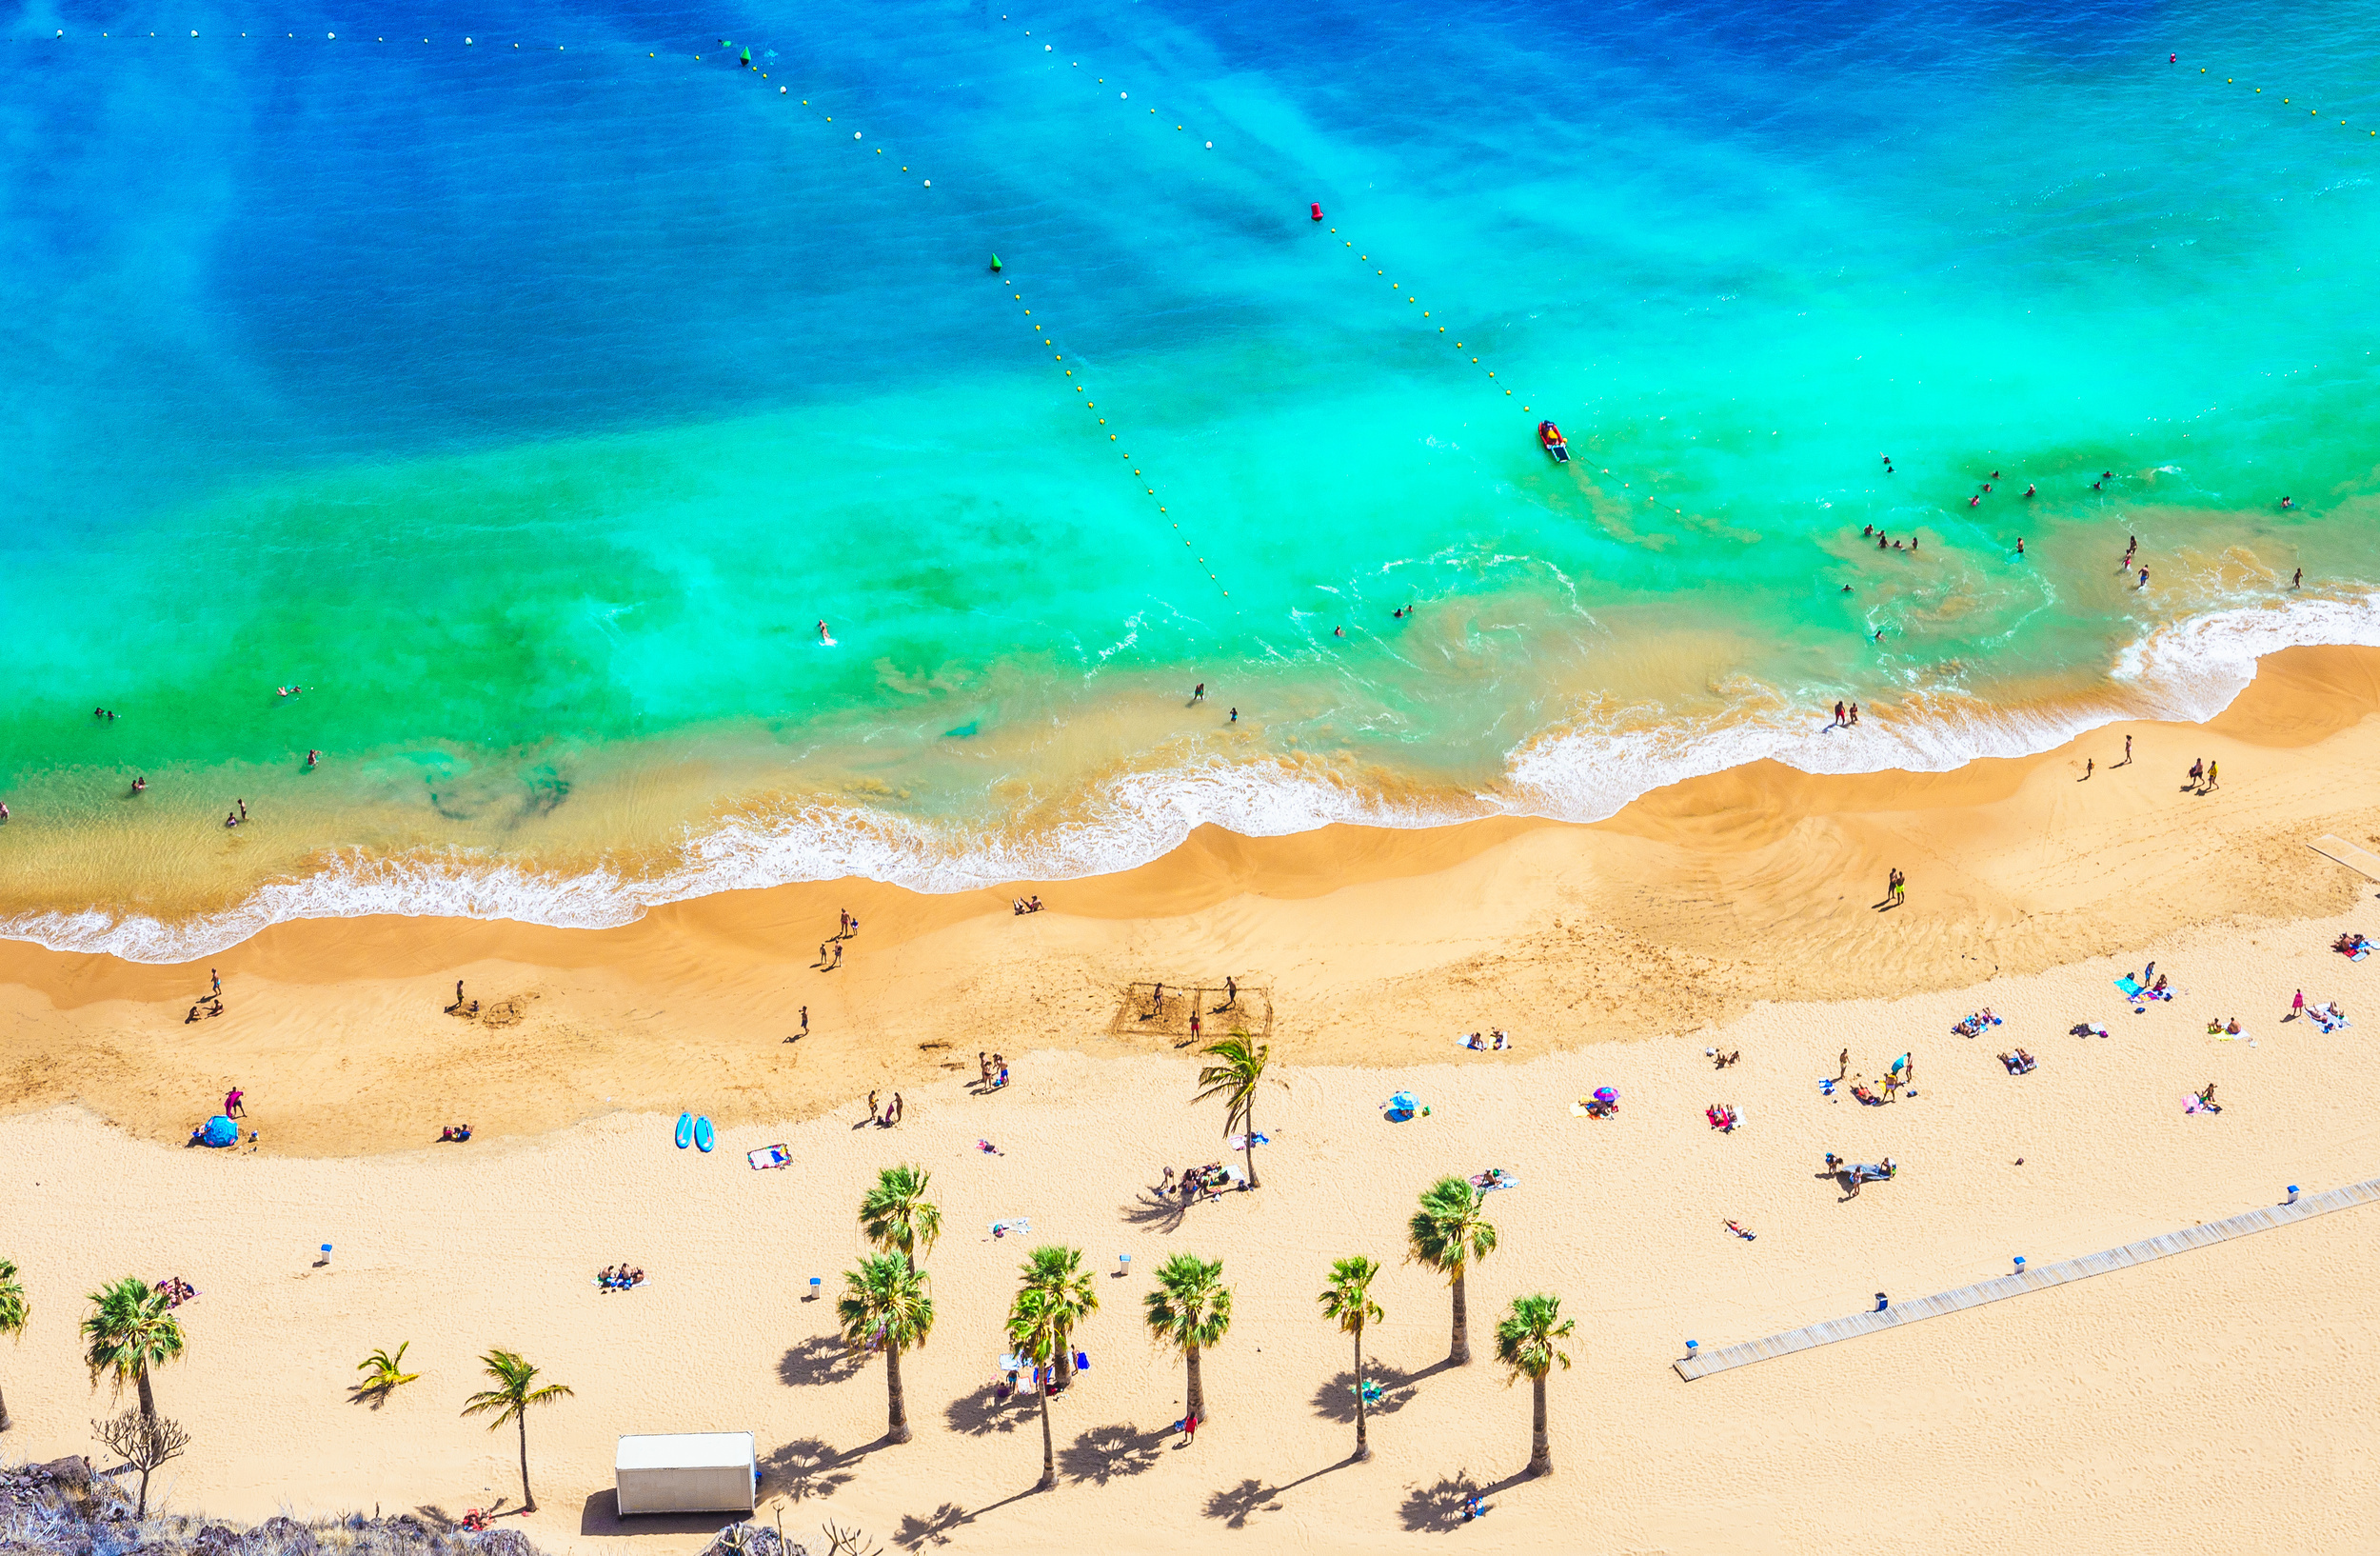 <p>The Canaries have become a favorite all around Europe as a sunshine getaway as the islands are warm year-round. This is rare, even in a lot of the Mediterranean. Thus, there are now direct flights from most major European hubs where you can enjoy summer weather no matter the month.</p><p>You may also like: <a href='https://www.yardbarker.com/lifestyle/articles/the_20_best_breweries_to_visit_in_the_united_states_030724/s1__40026304'>The 20 best breweries to visit in the United States</a></p>